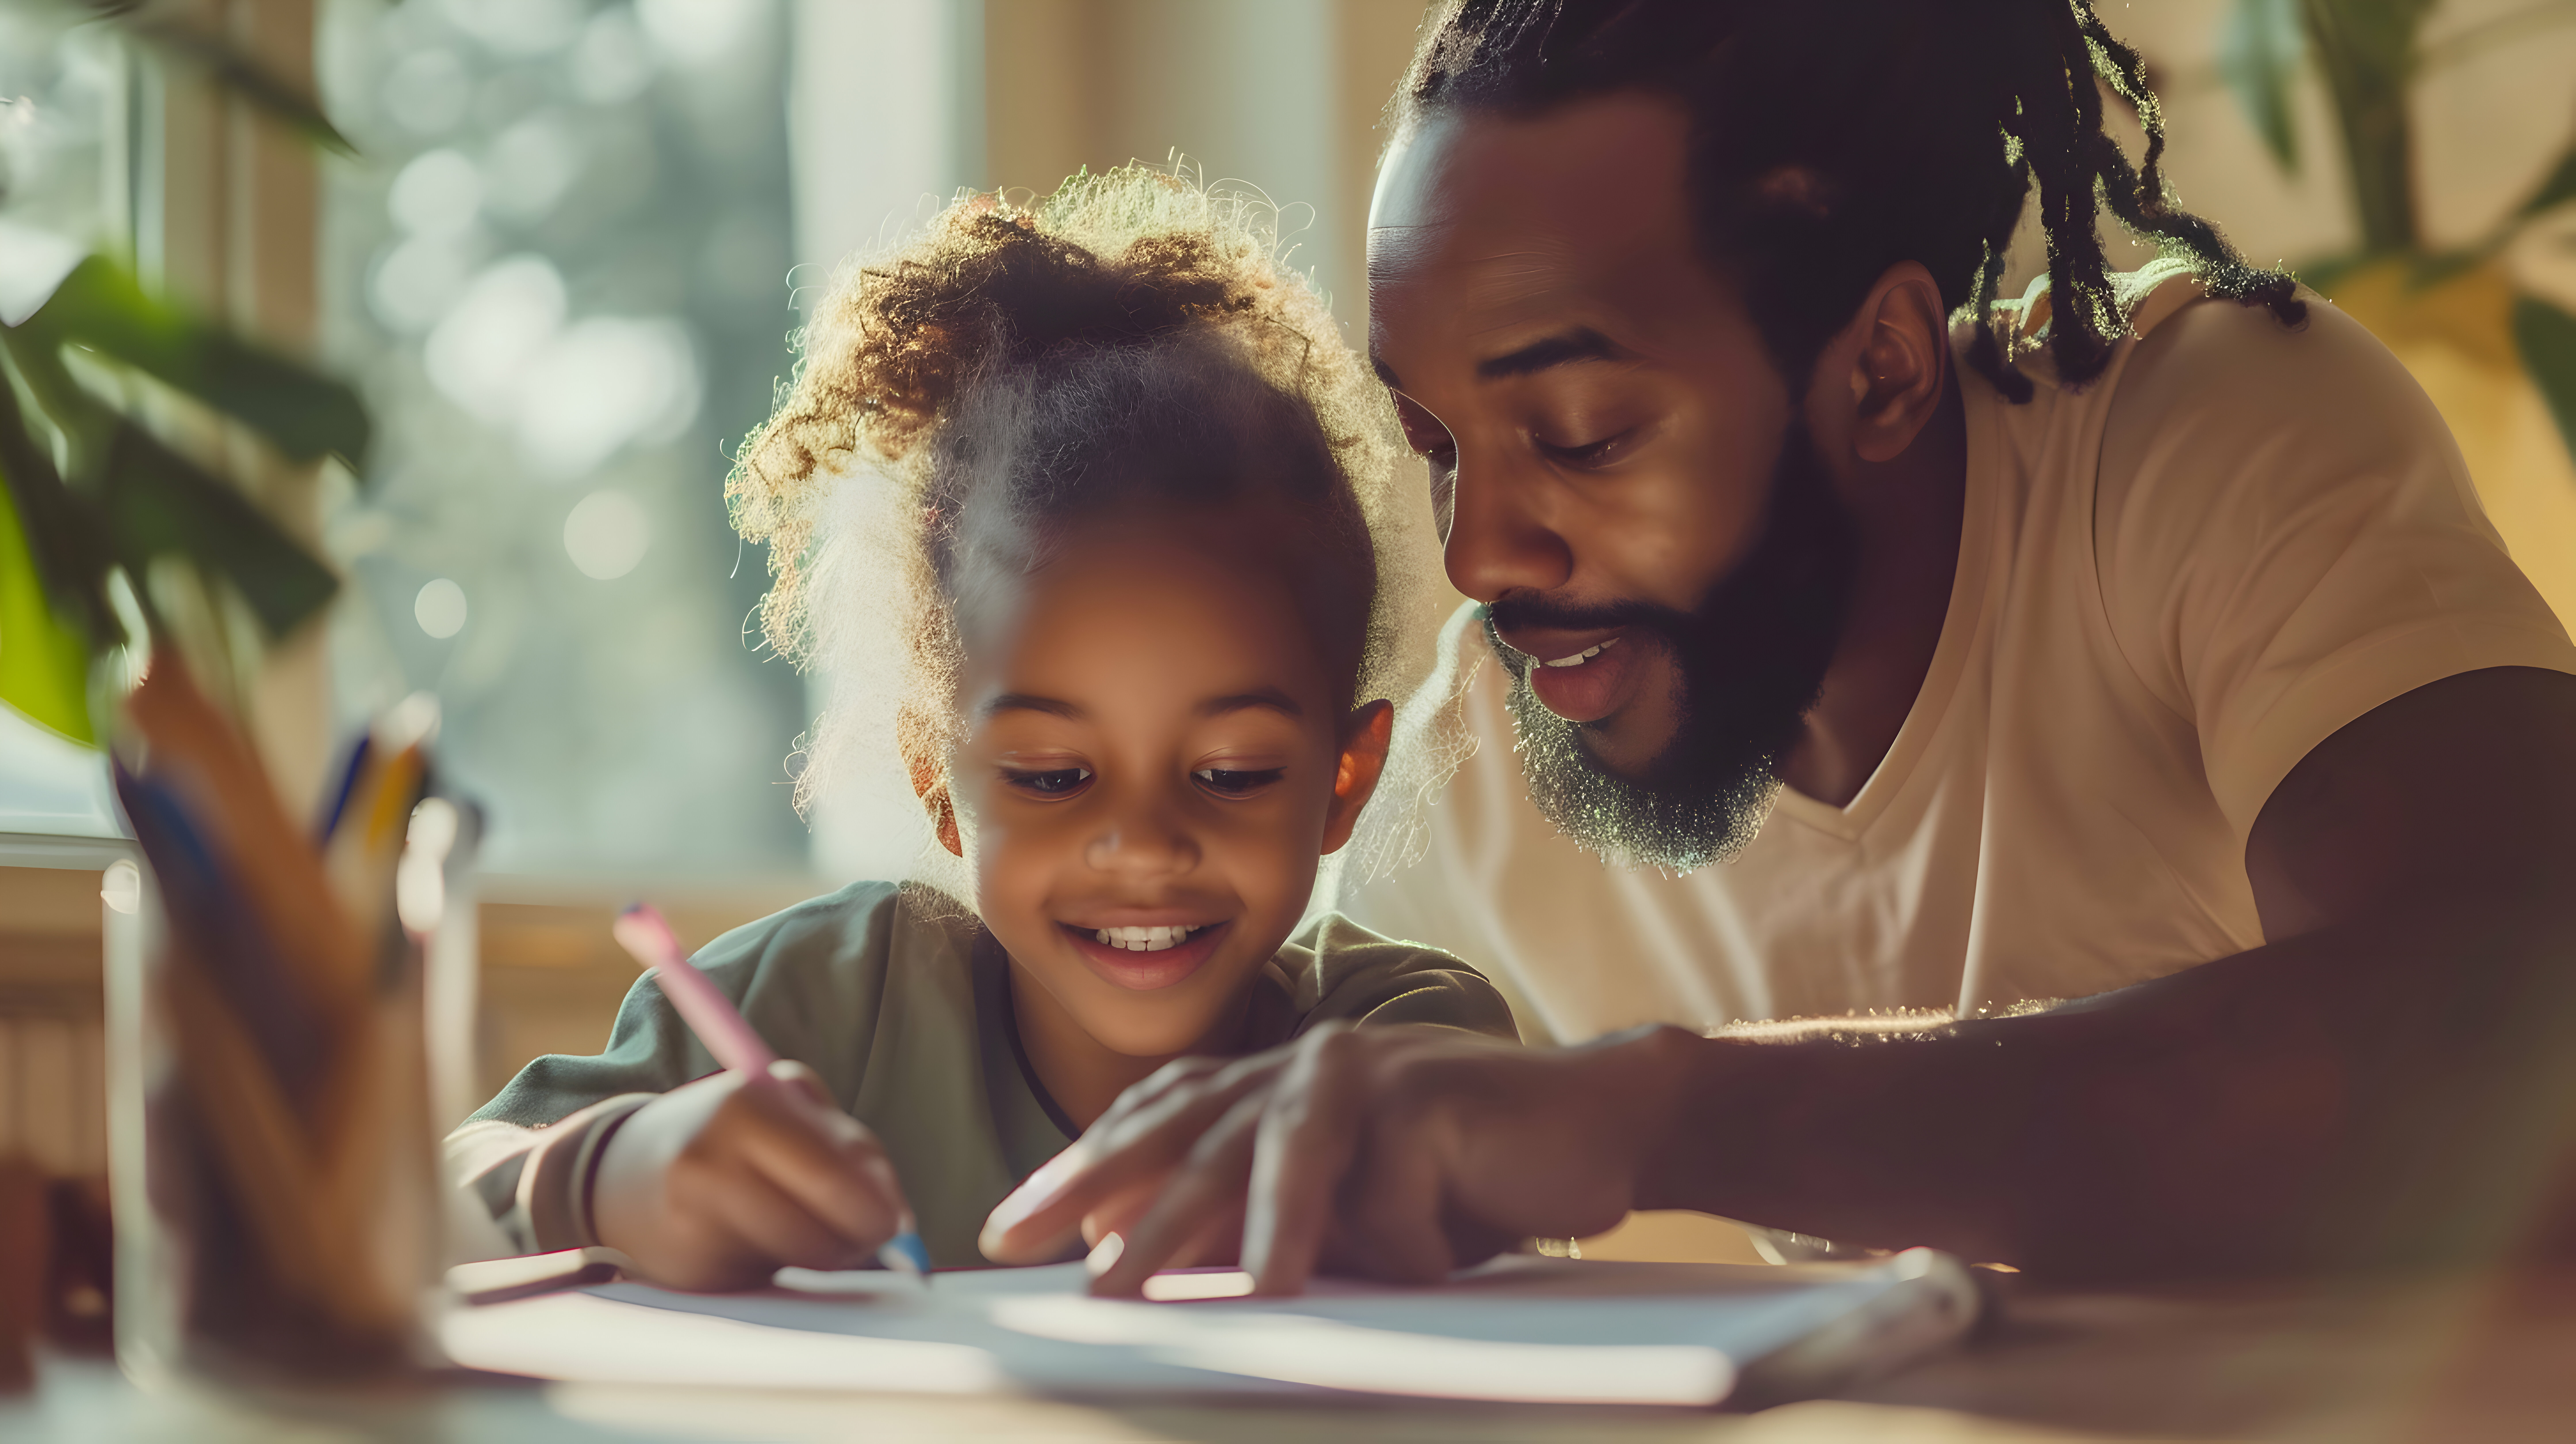 African american father doing homework with his daughter. Black dad helping kid to learn and study for school. Family portrait.